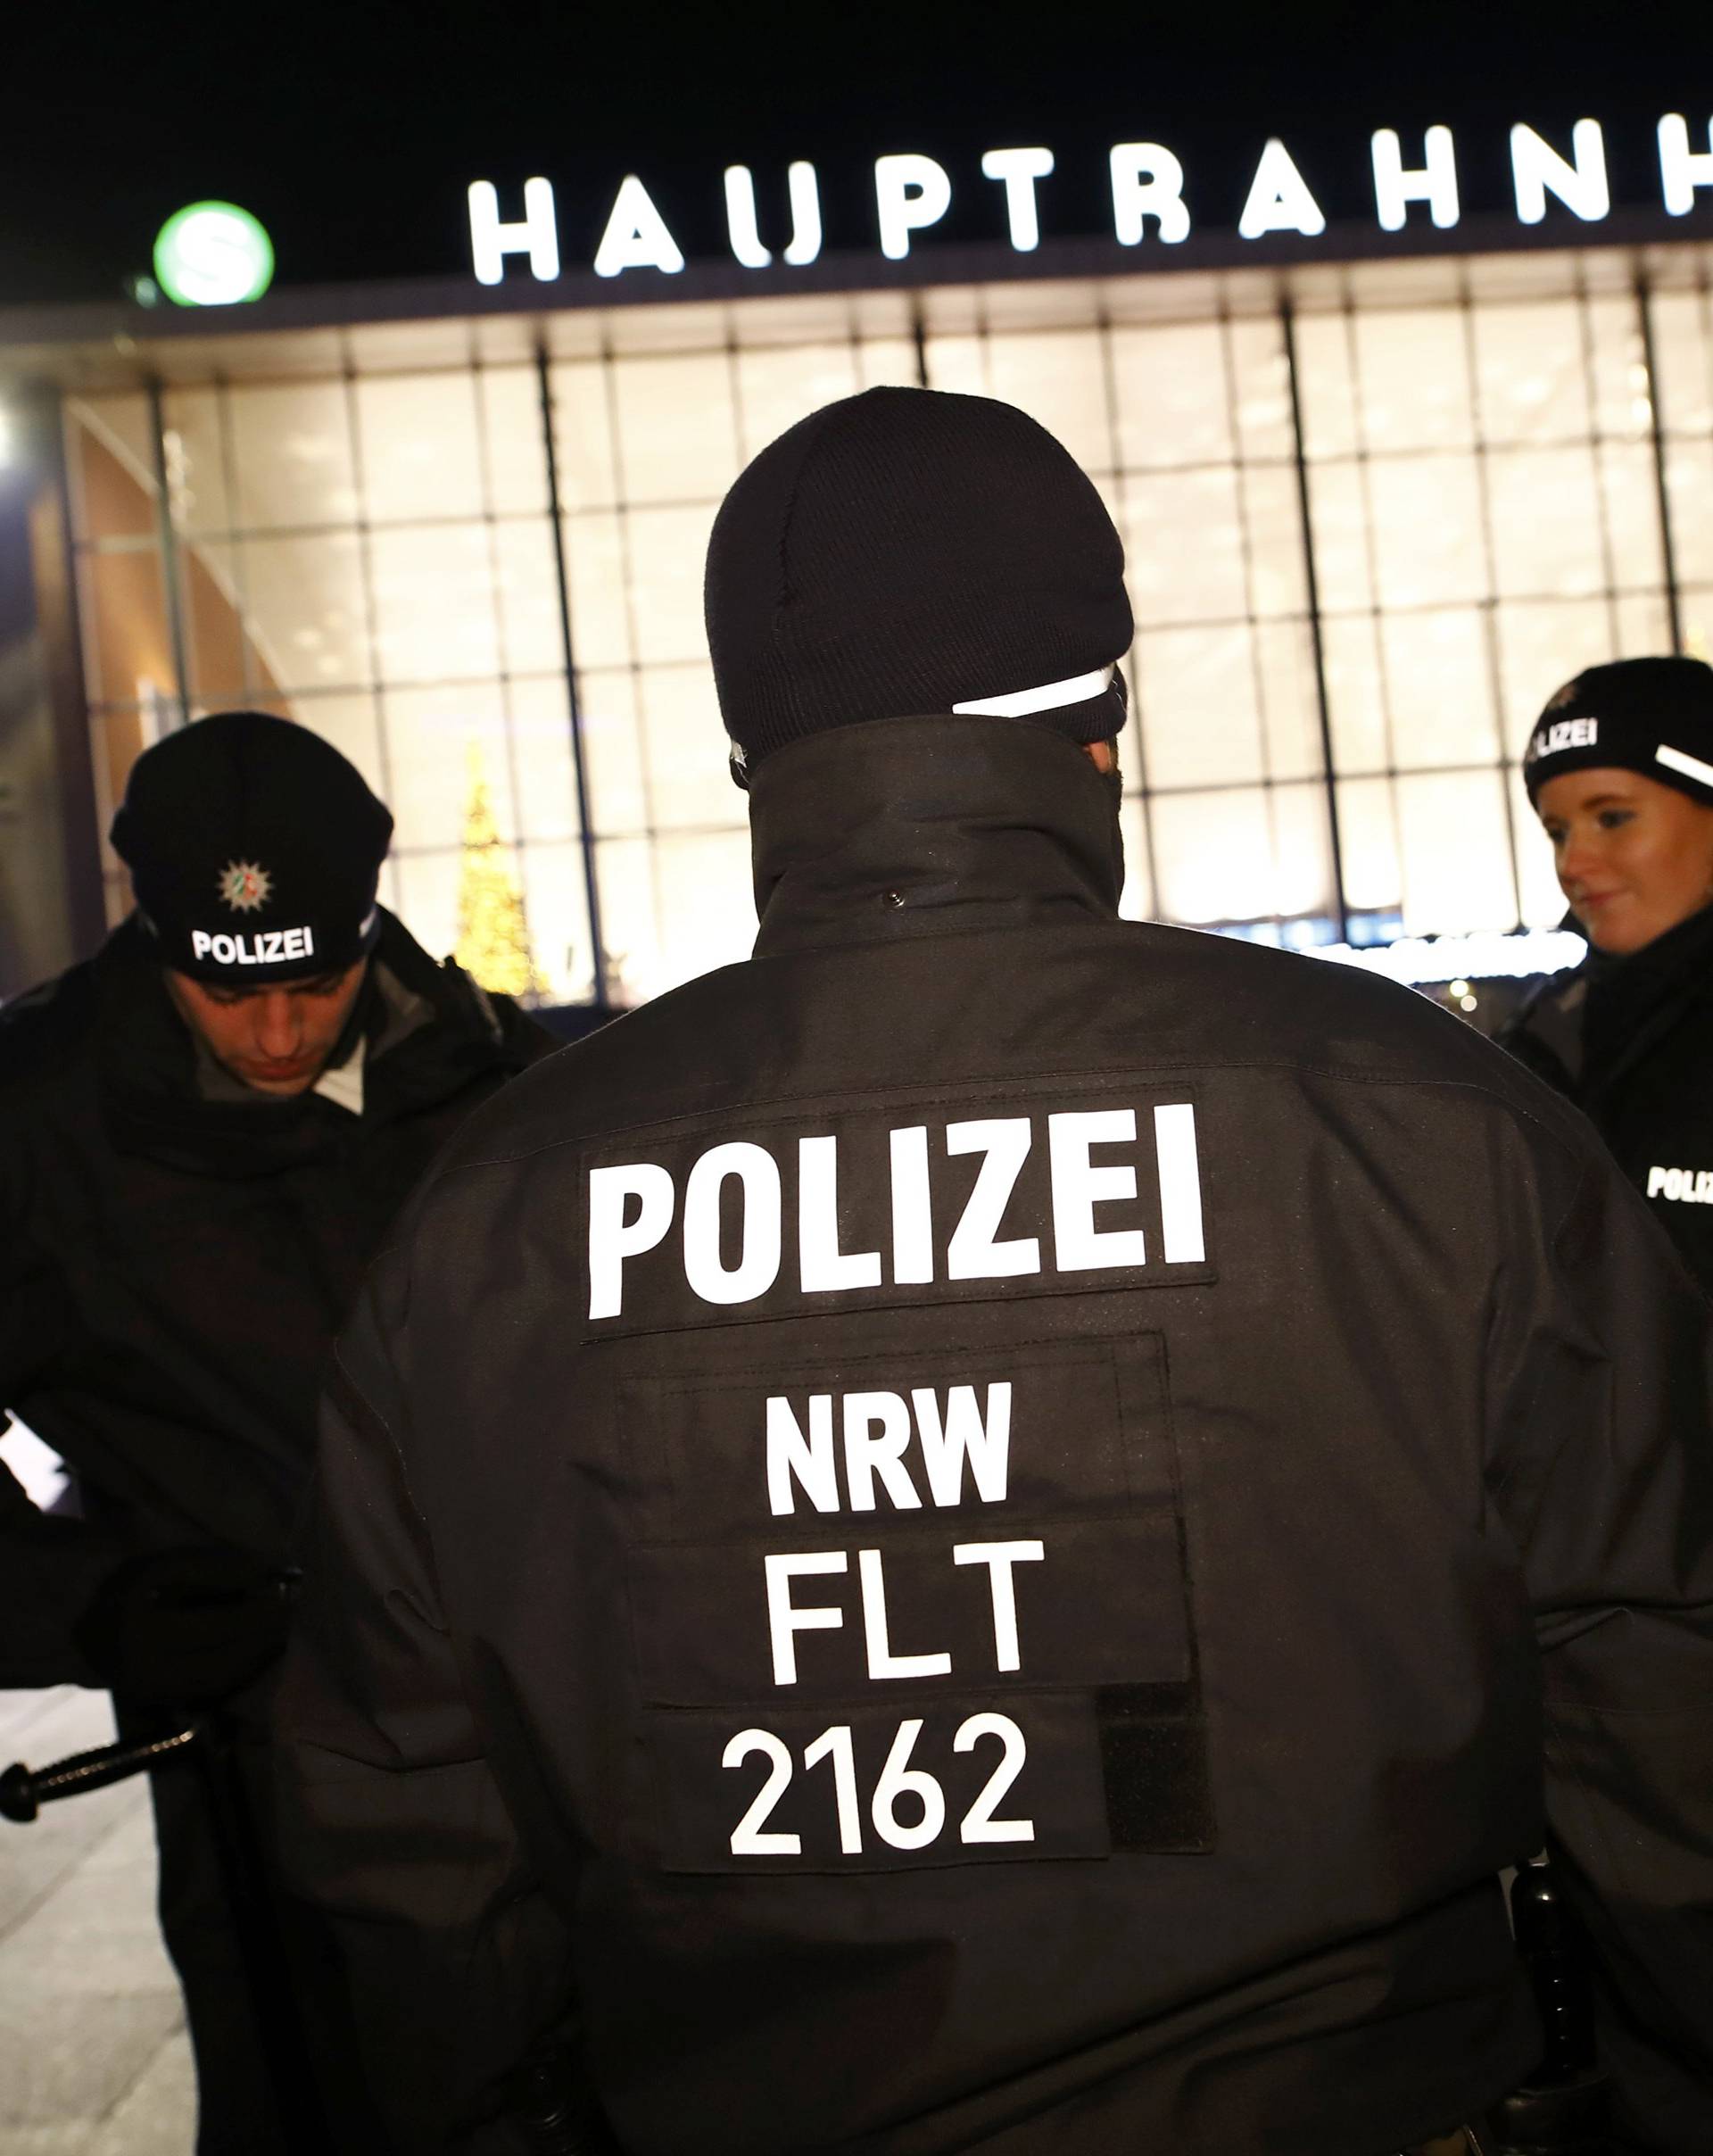 German police officers gather near the Hauptbahnhof before New Year celebrations for 2017 in Cologne